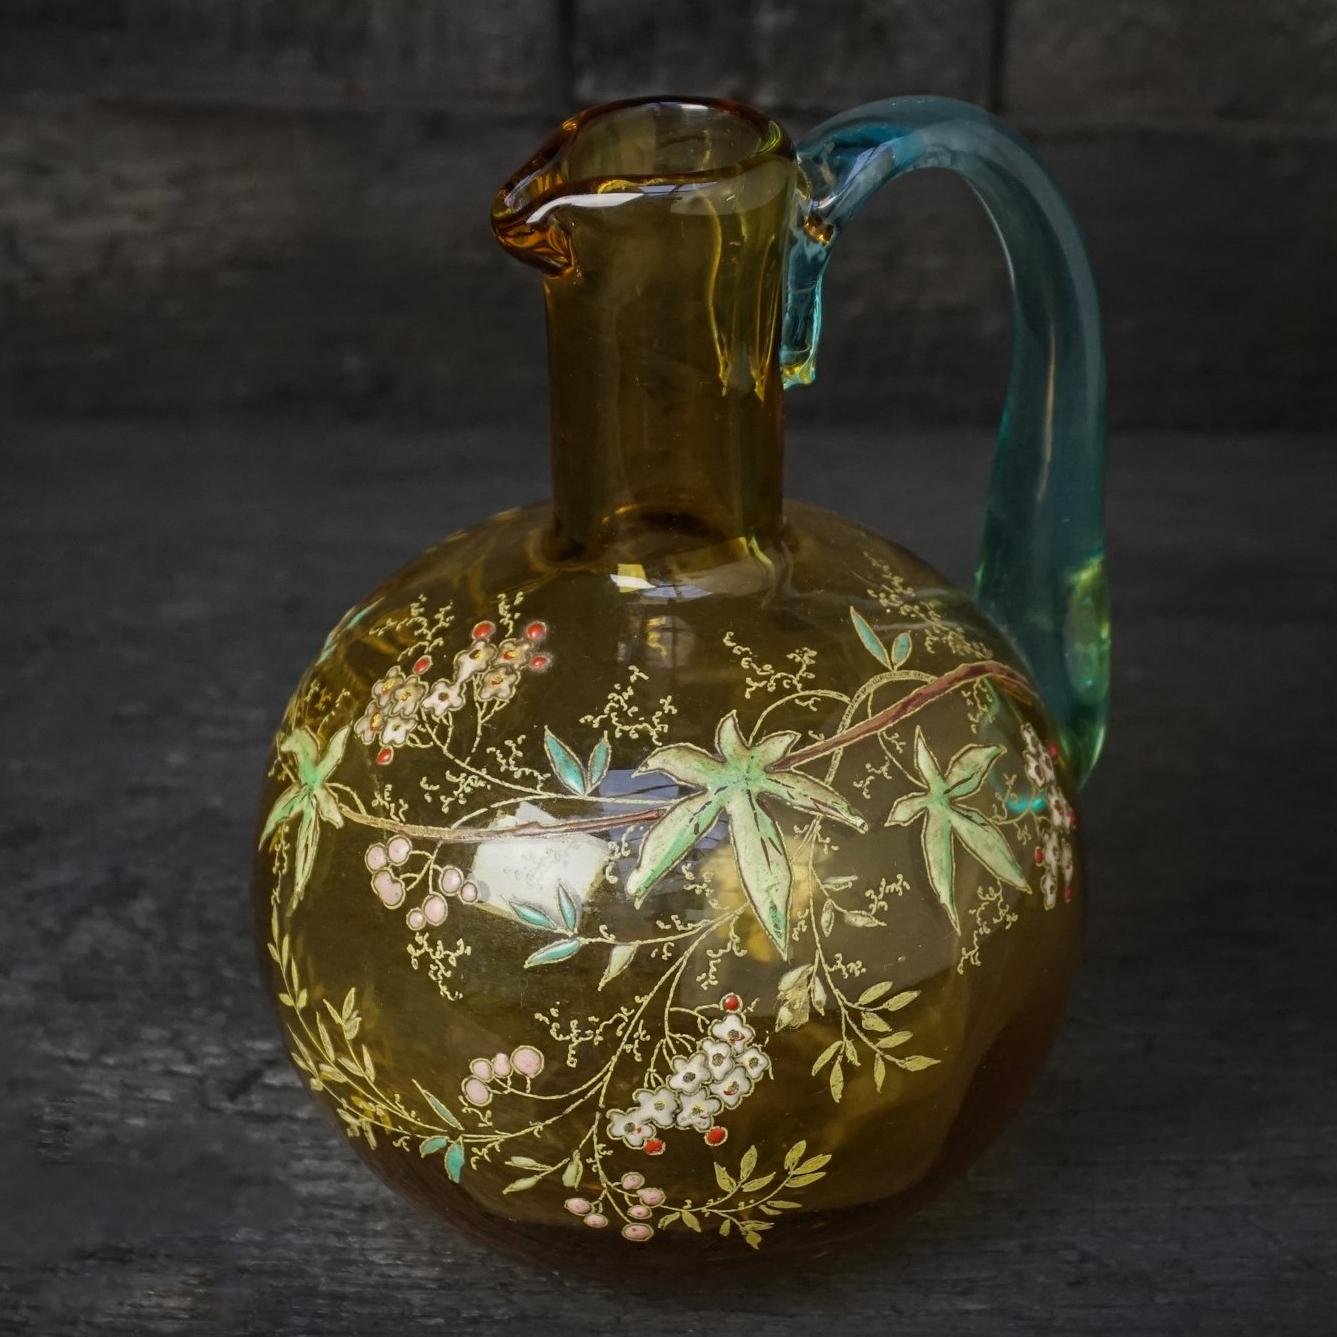 Sweet little handblown carafe or decanter in amber glass with a very detailed enamel decor of flower, berries and leaves. It has a blue handle.

Visible pontil, Legras' initial and number '44' on the bottom.
(A pontil is the scar where the